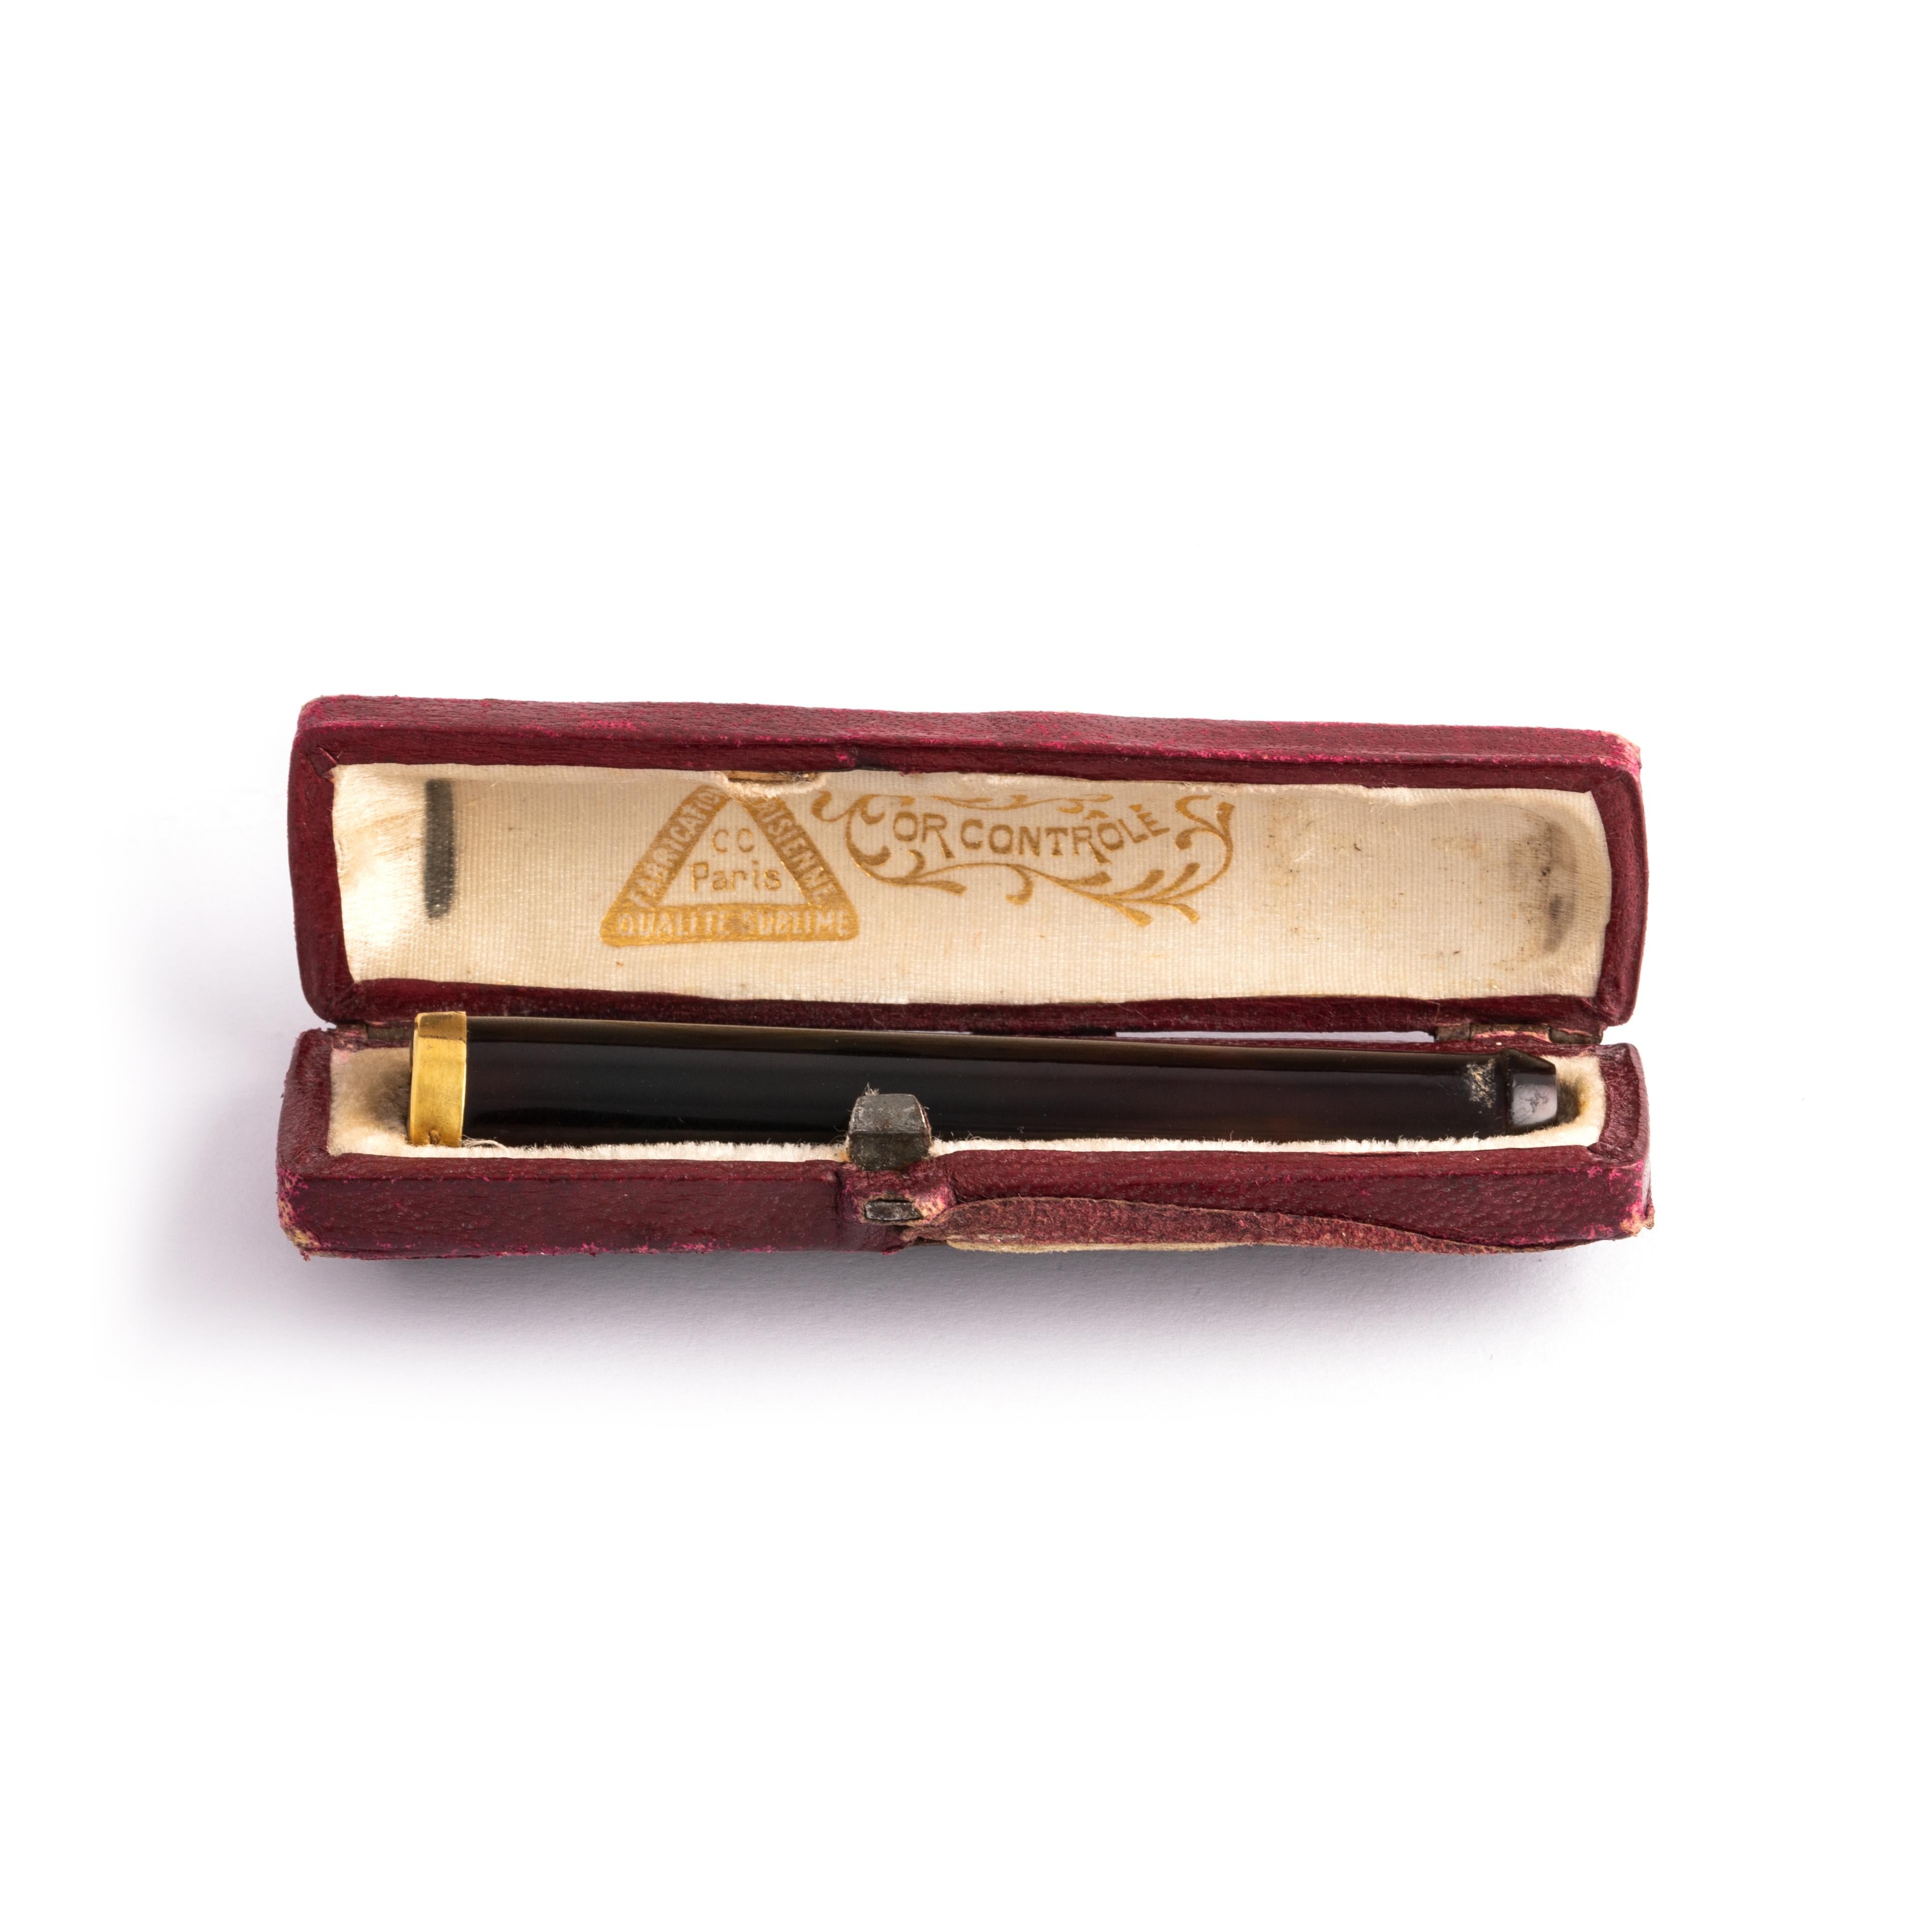 Cigarette holder yellow gold 18K.
French assay. Antique.
Original case.
Total weight: 4.72 grams.
Total length: 7.10 centimeters